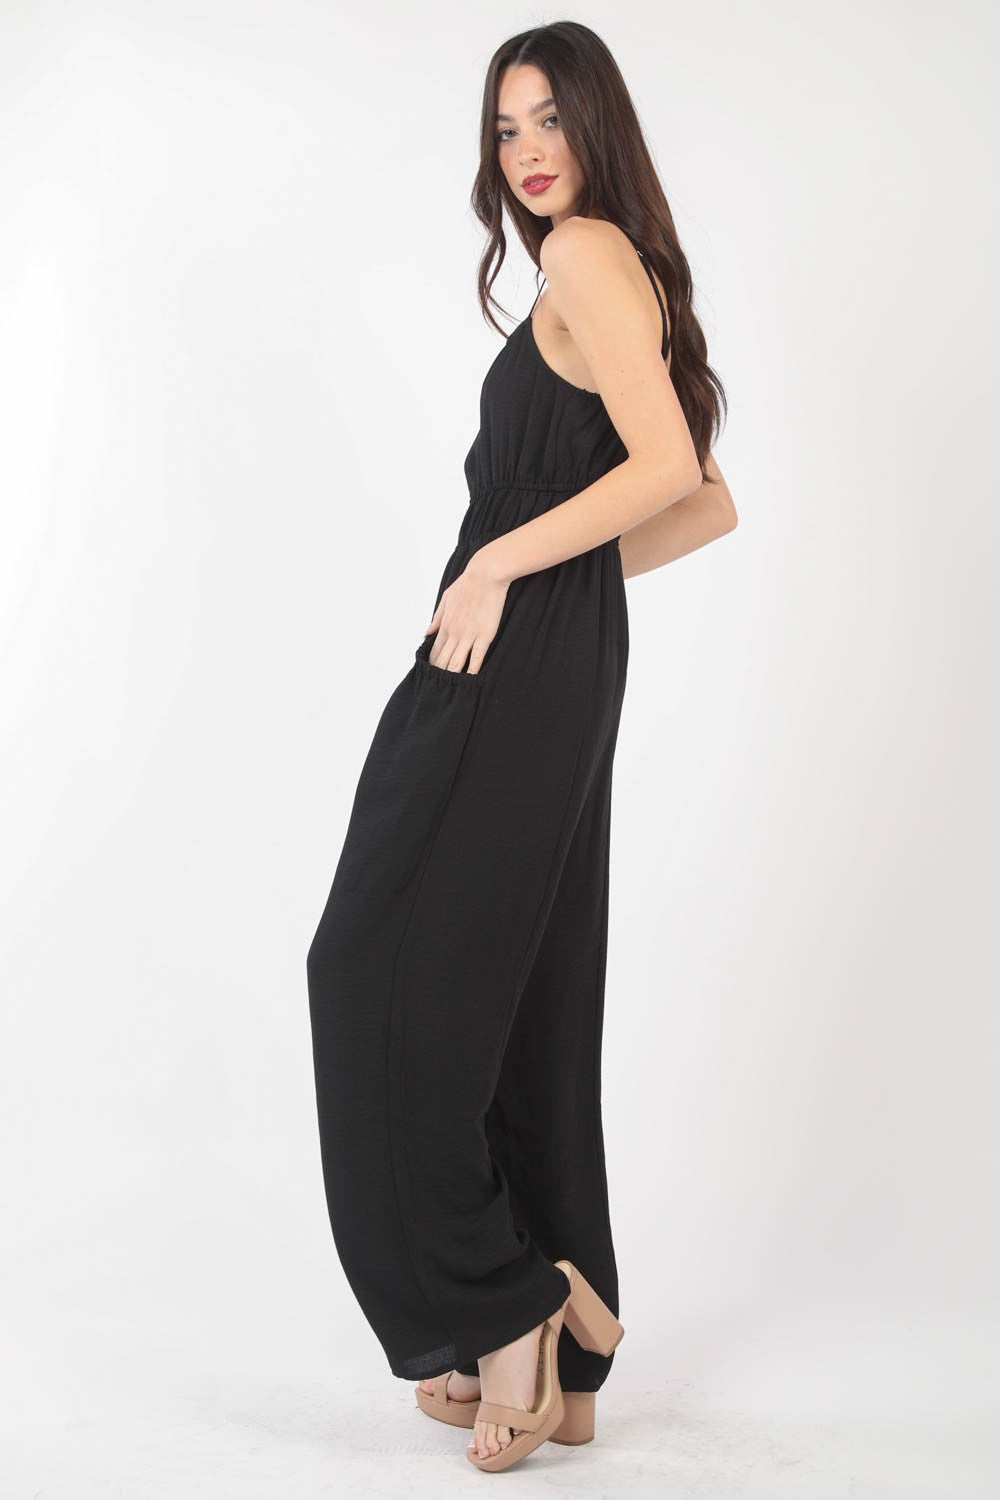 Addison - Pintuck Detail Woven Sleeveless Jumpsuit - Black - Exclusively Online